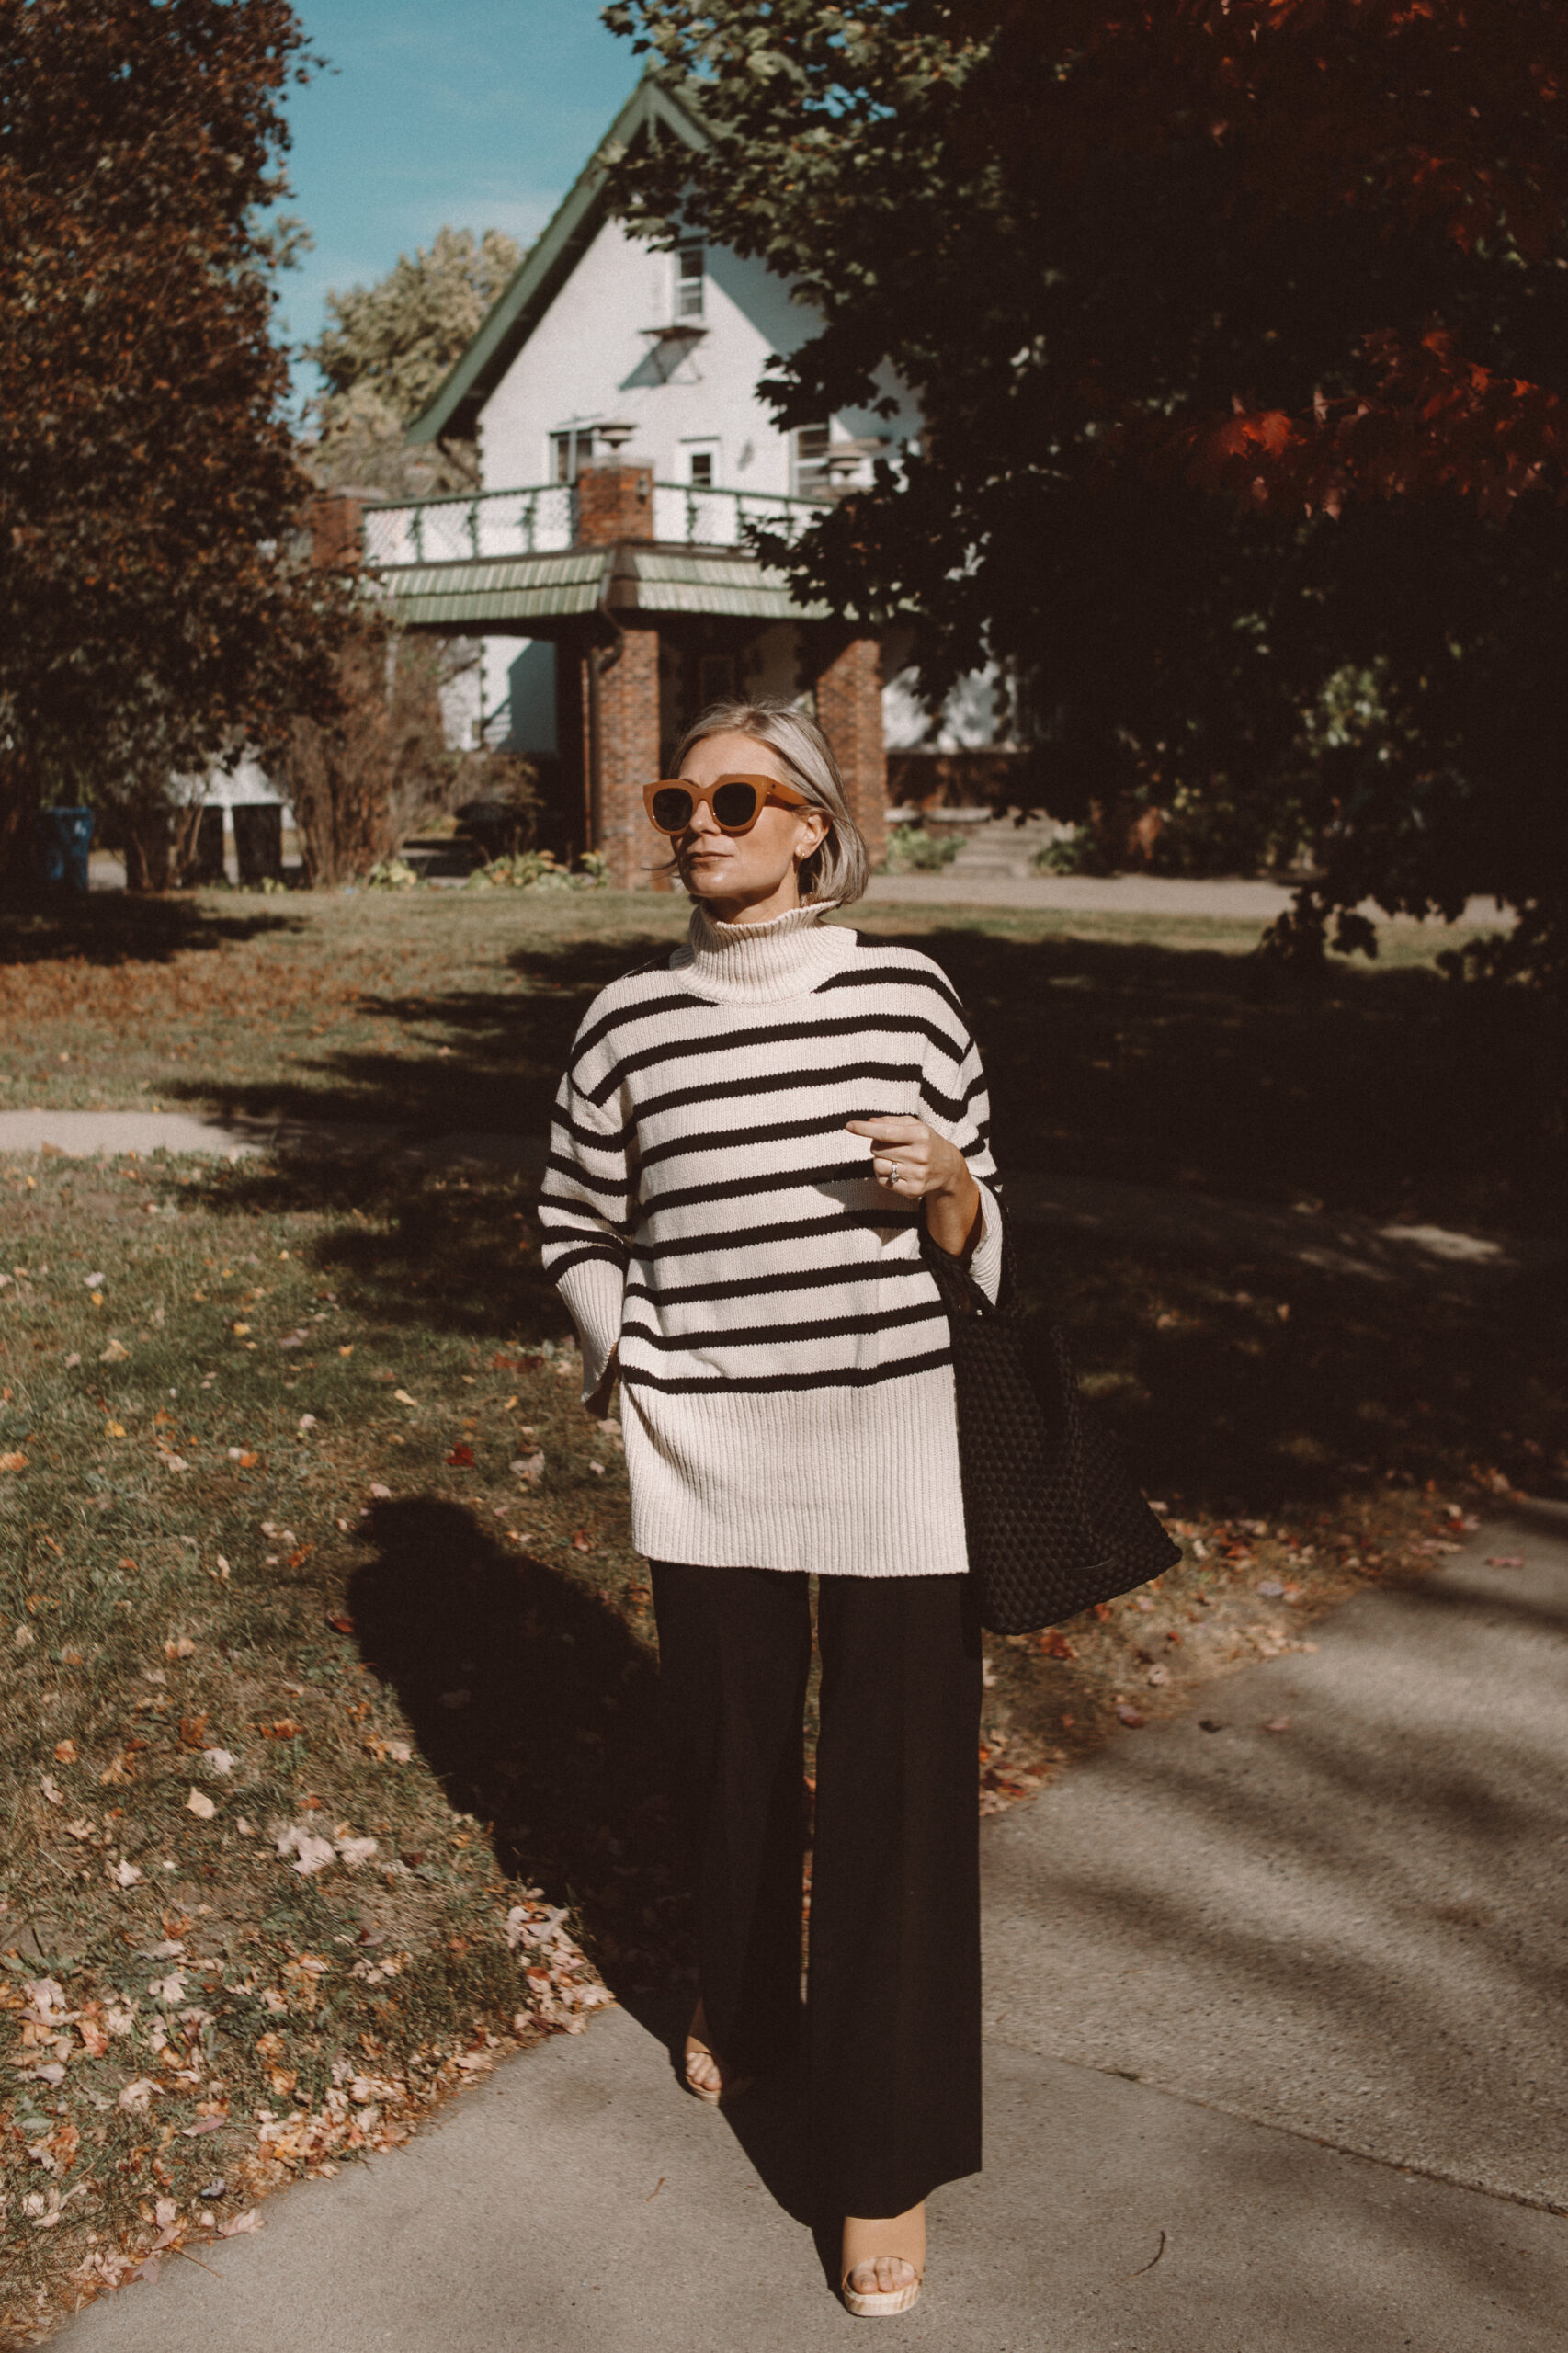 Karin Emily wears a pair of wooden blogs, striped turtleneck, black tote bag, and black wide leg pants